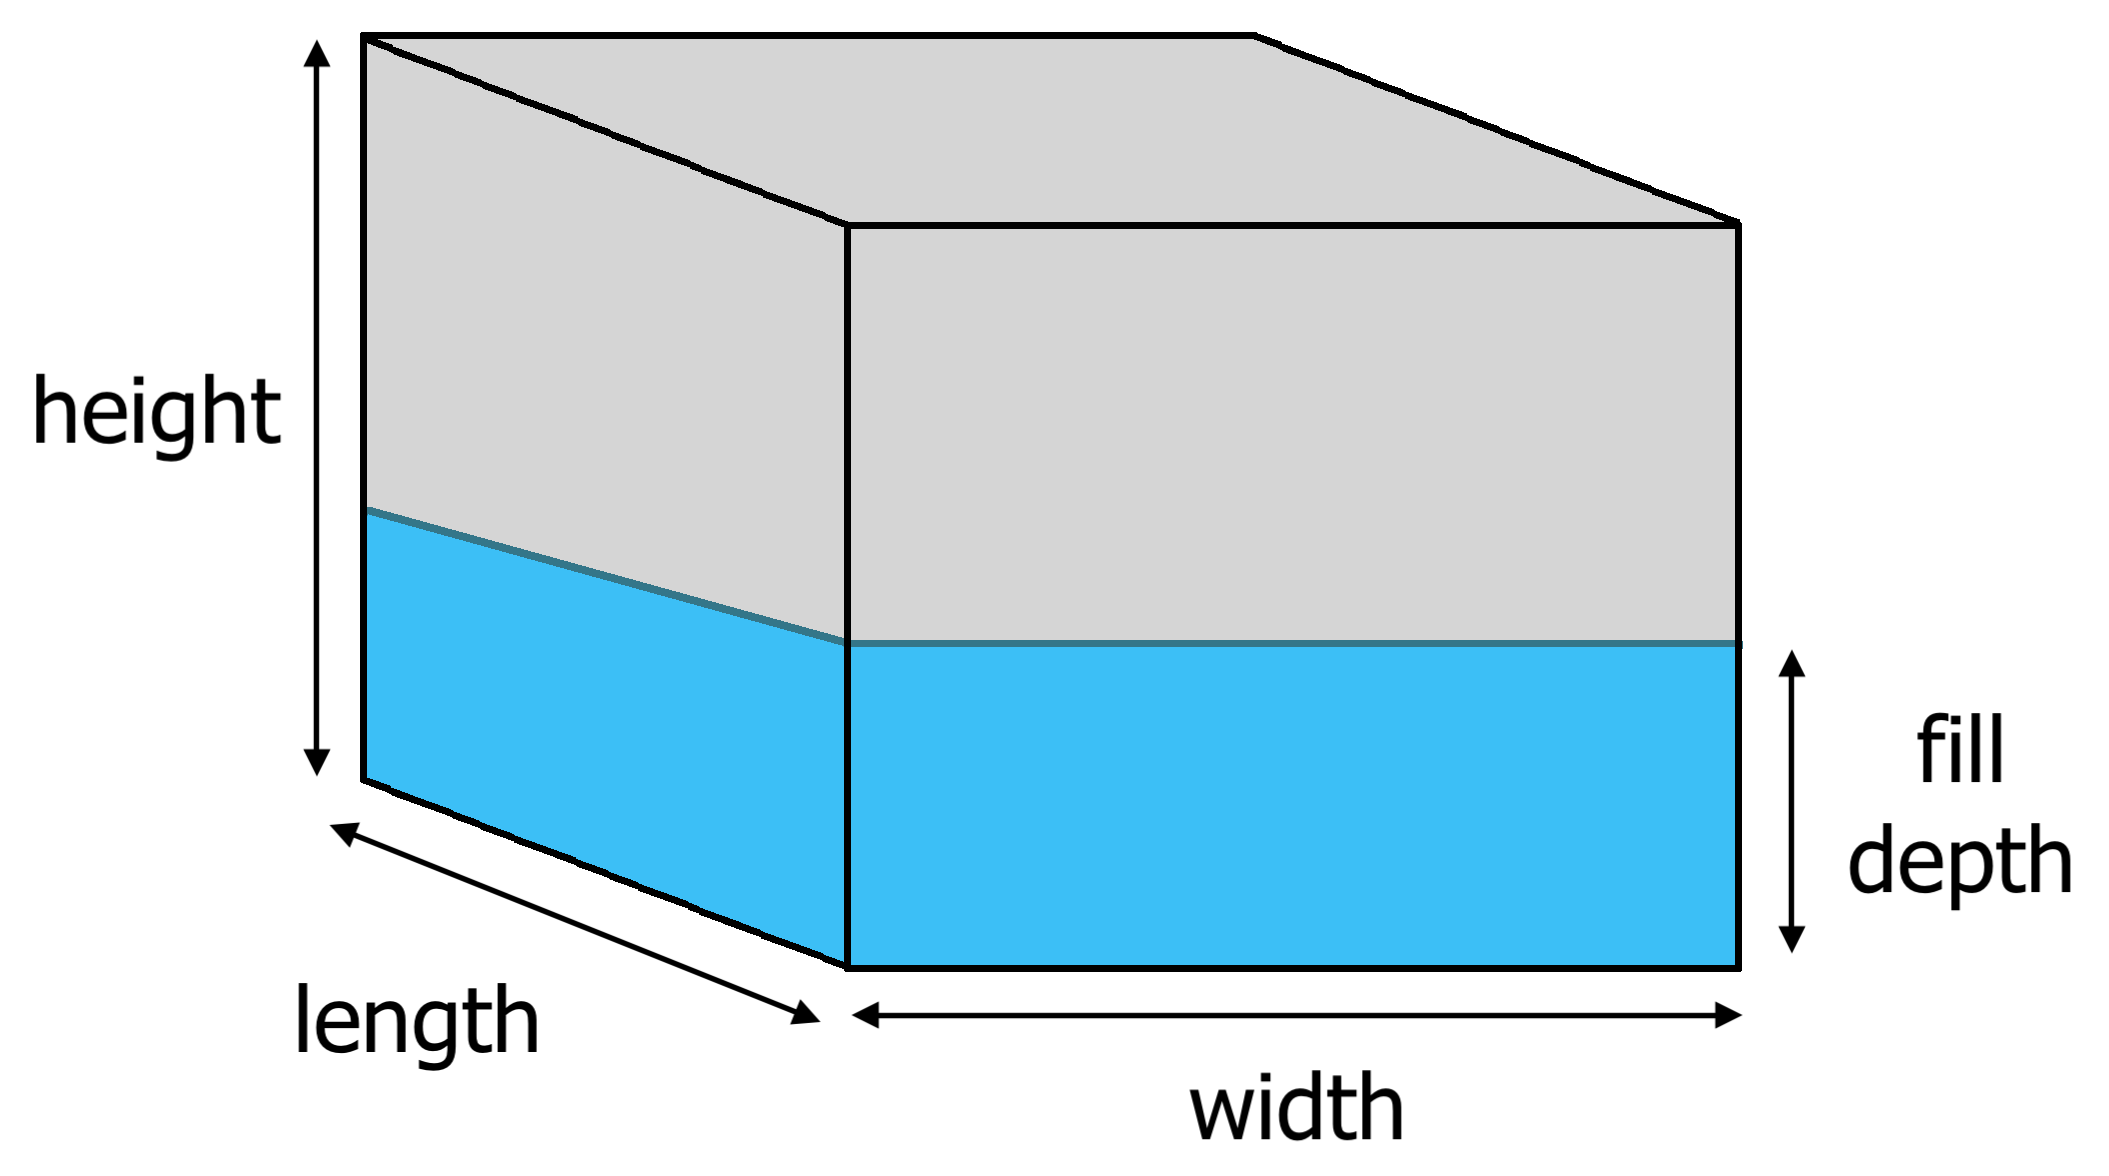 Diagram of a rectangular tank showing the length, width, and height dimensions